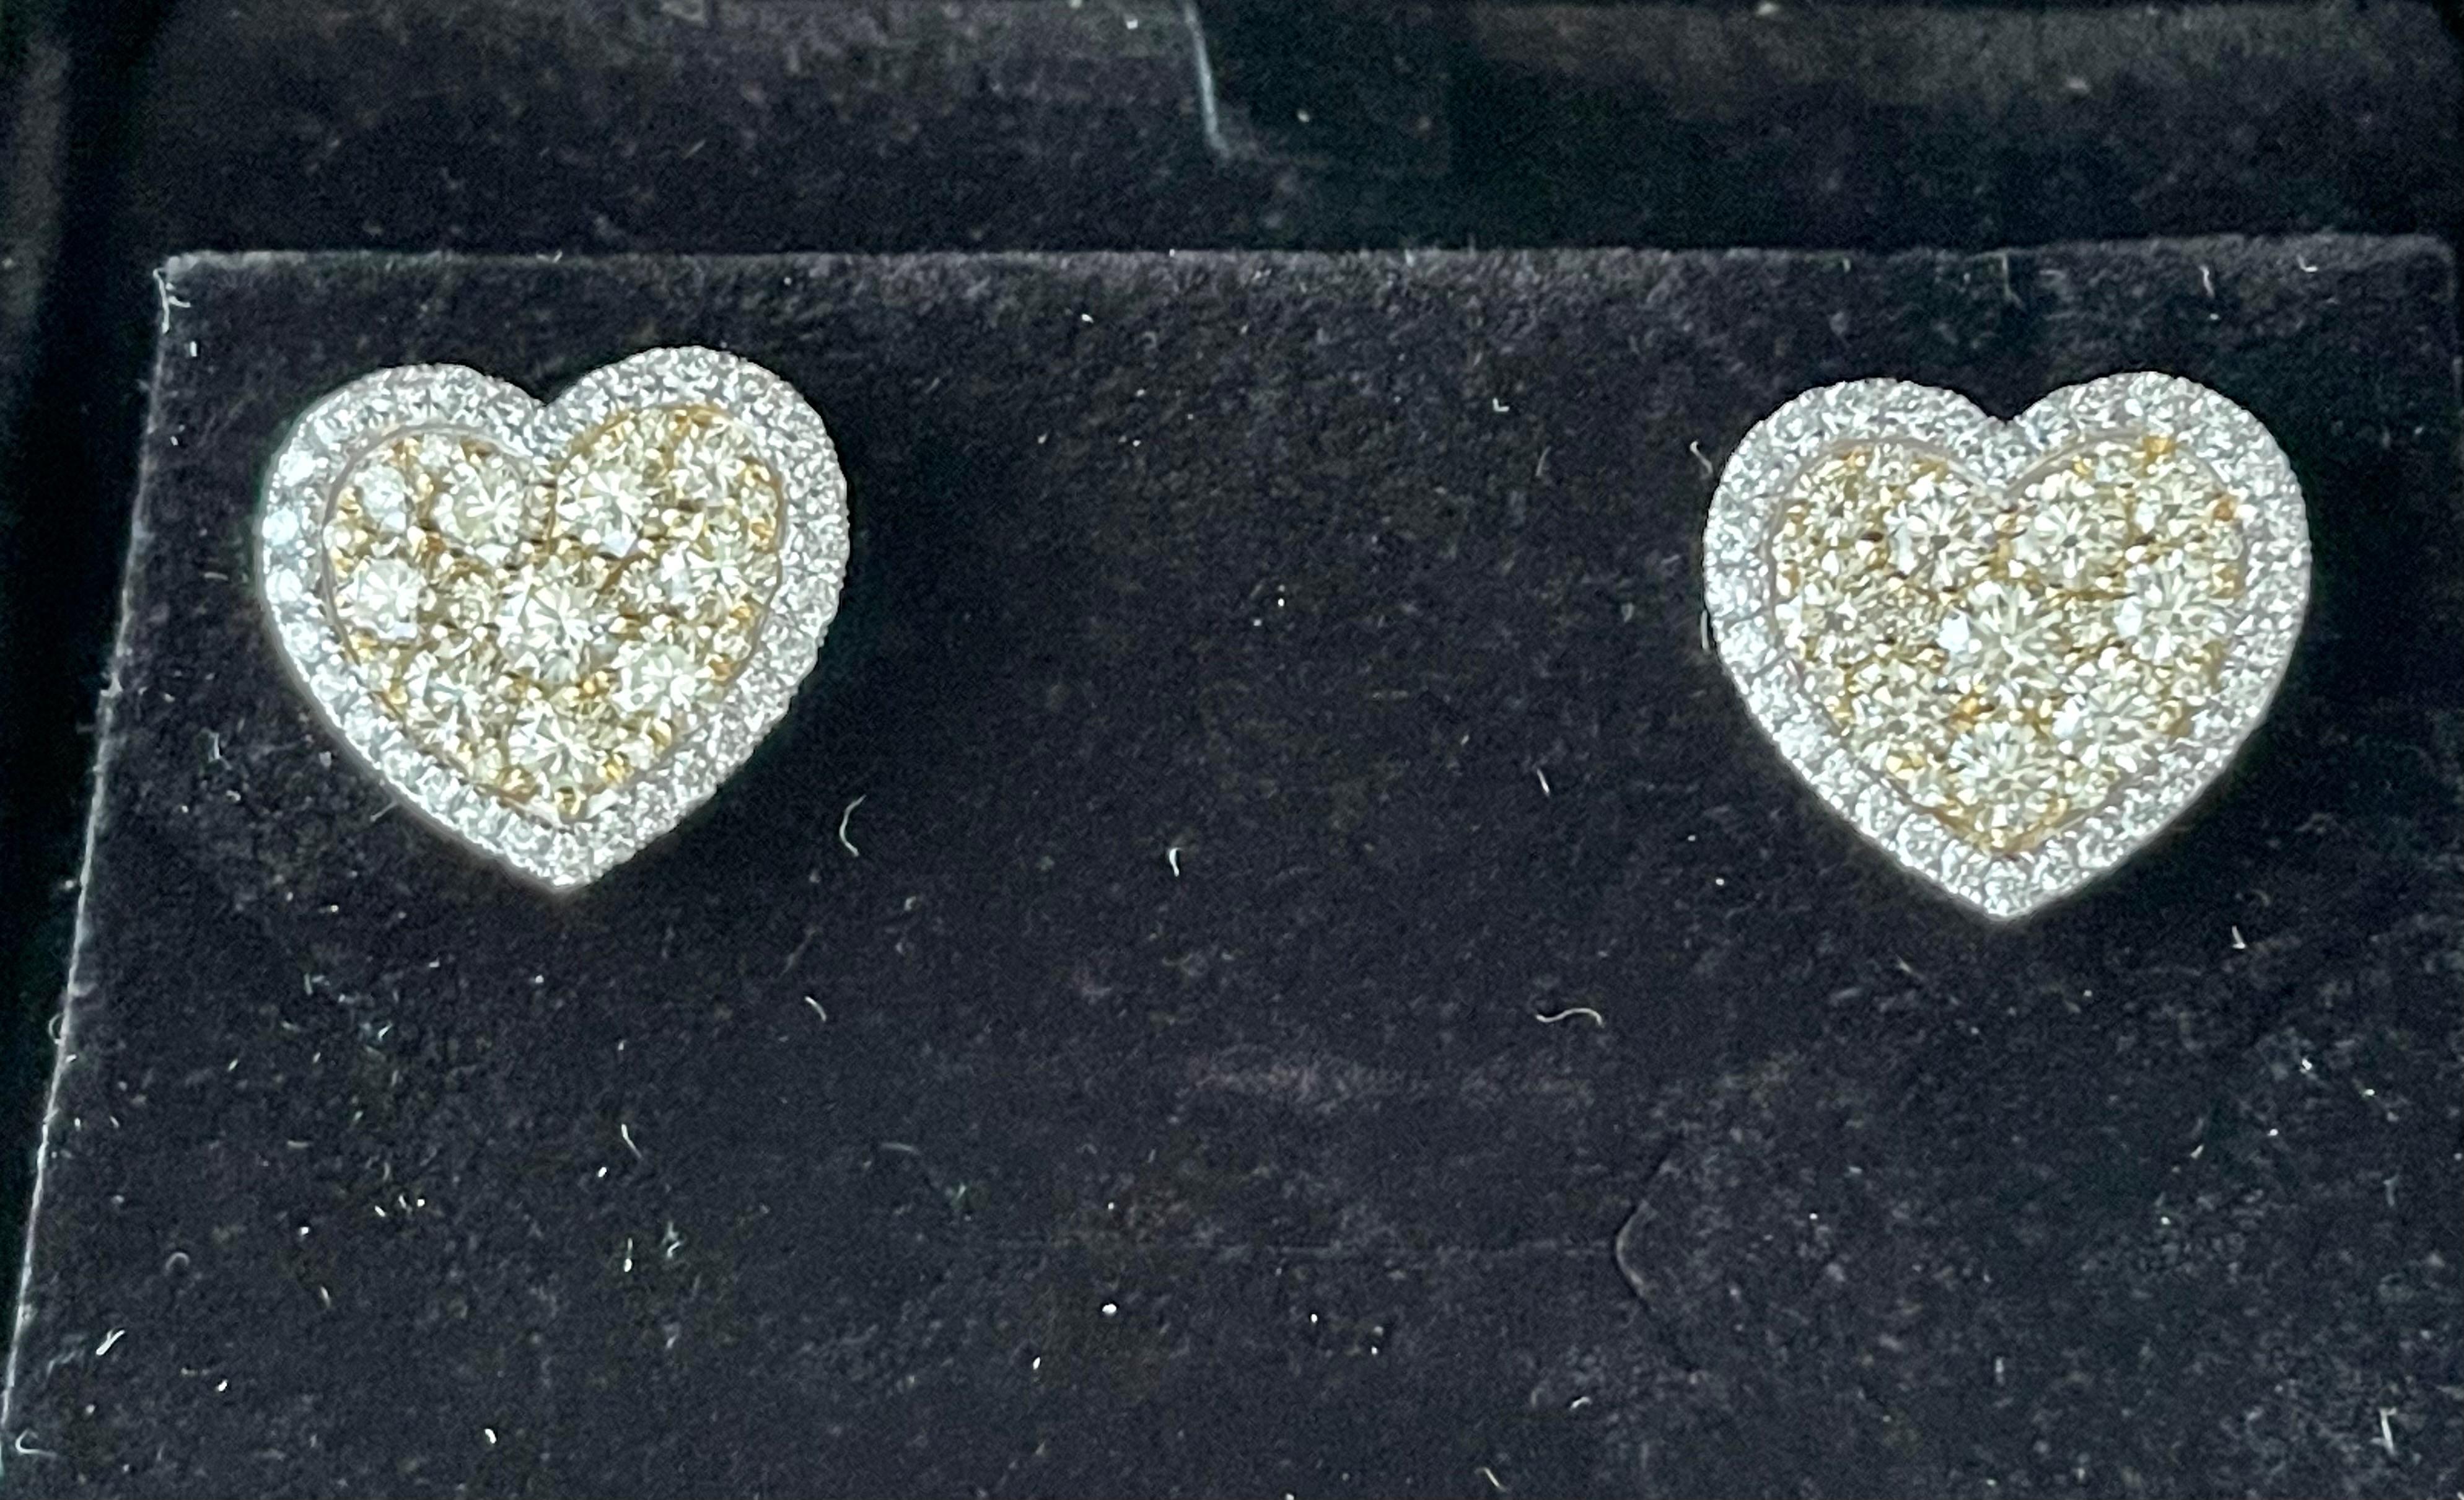 14 K Yelllow and White Gold 3.86 Total Carat Heart Shaped Earrings For Sale 3